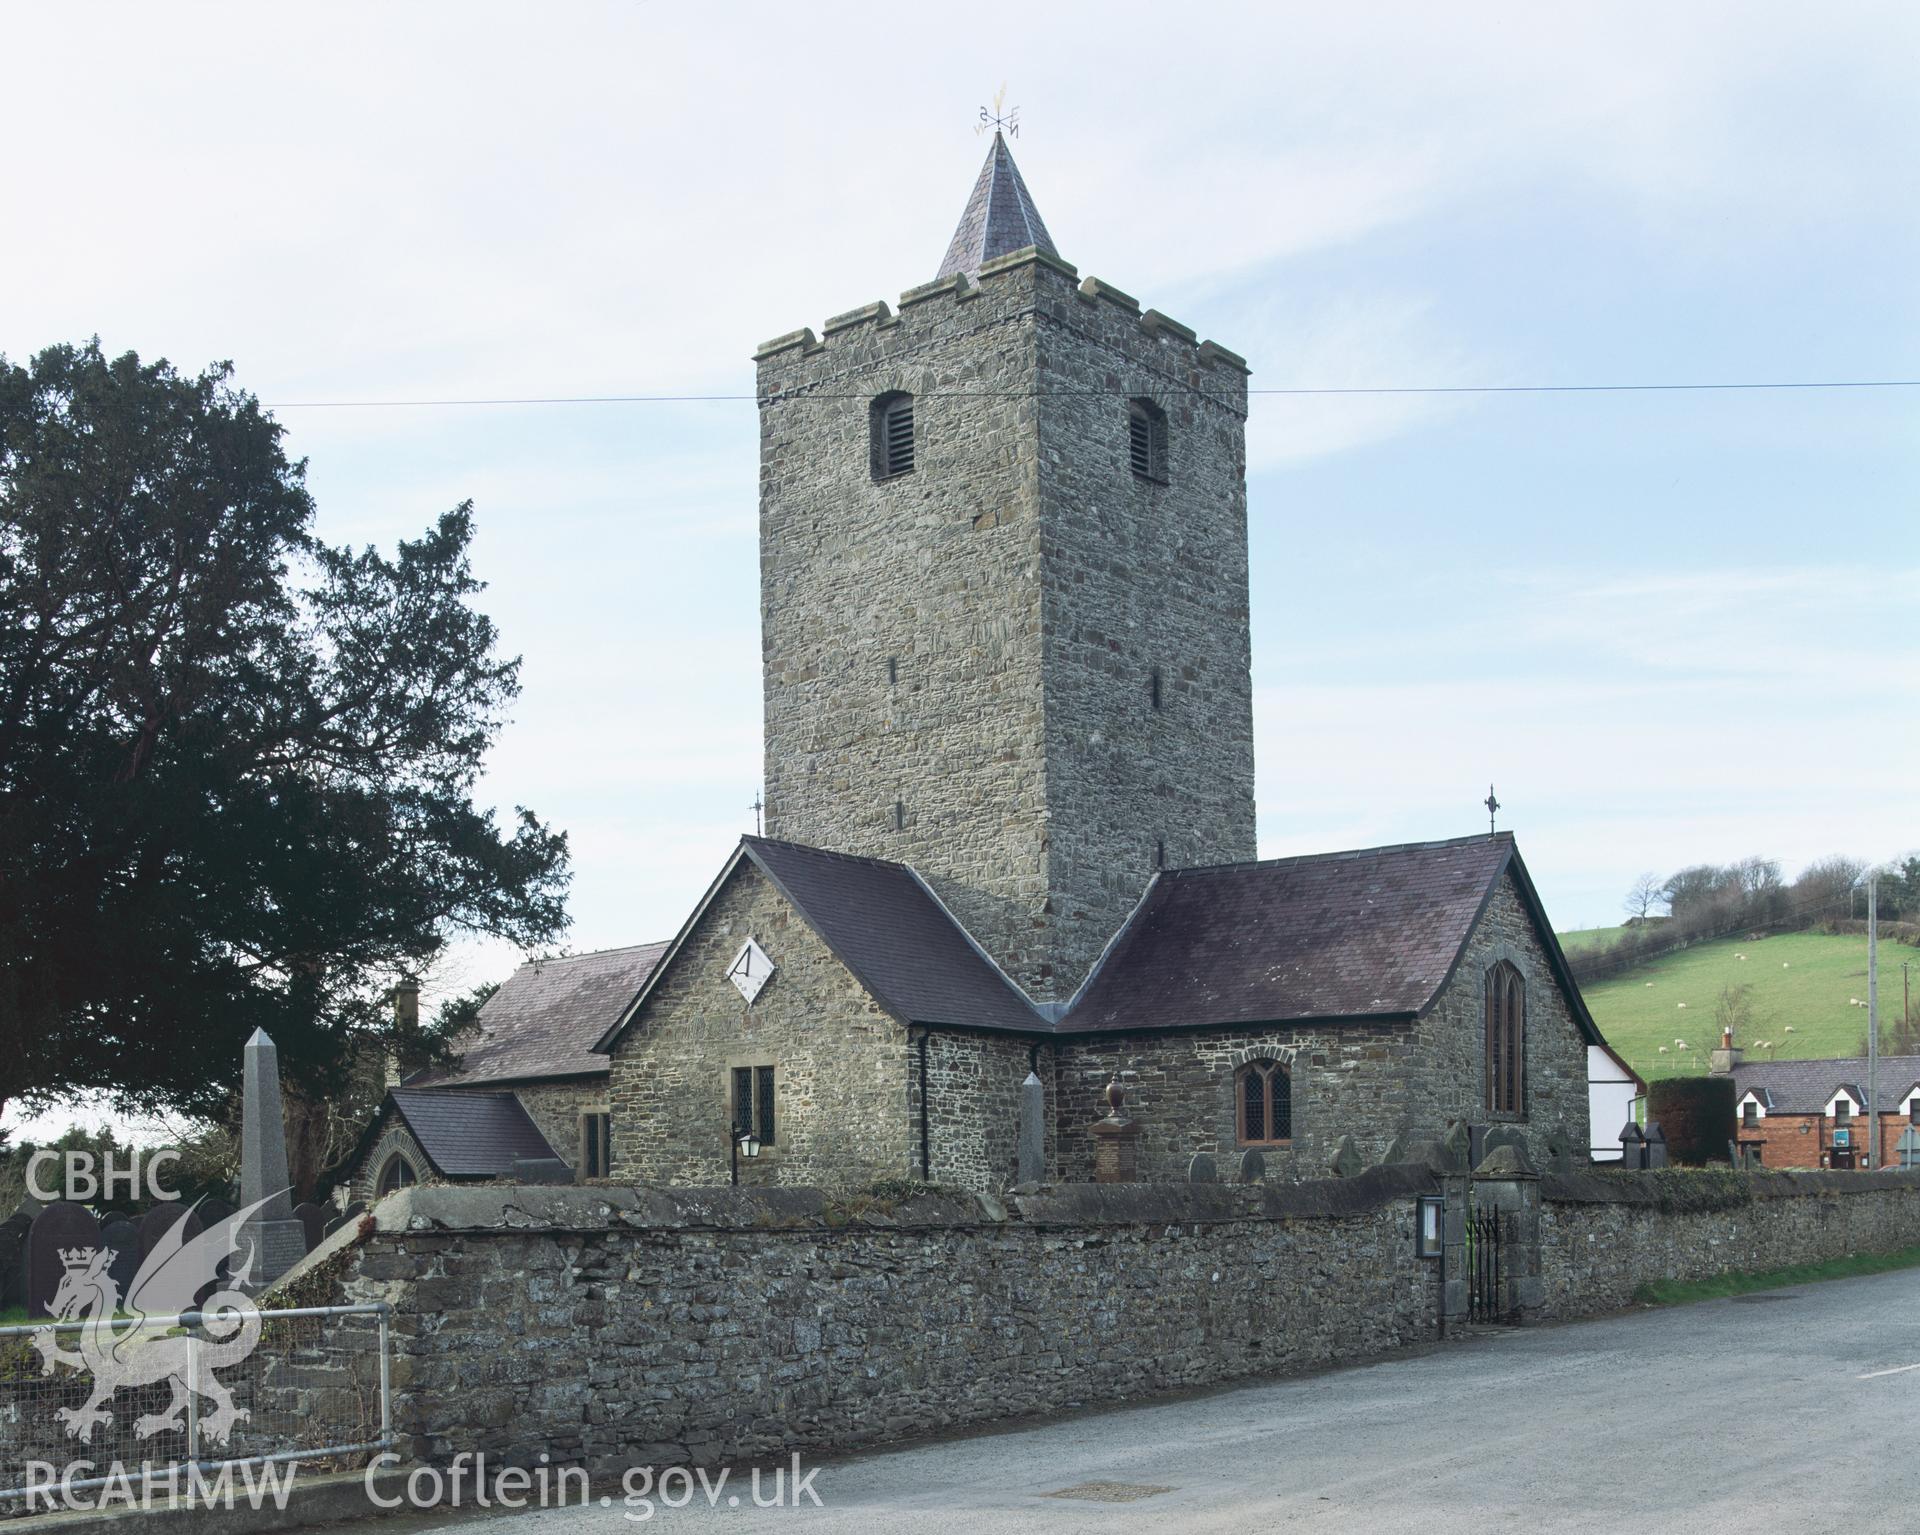 Colour transparency showing view of St Michael's Church, Llanfihangel y Creuddyn, produced by Iain Wright, June 2004.